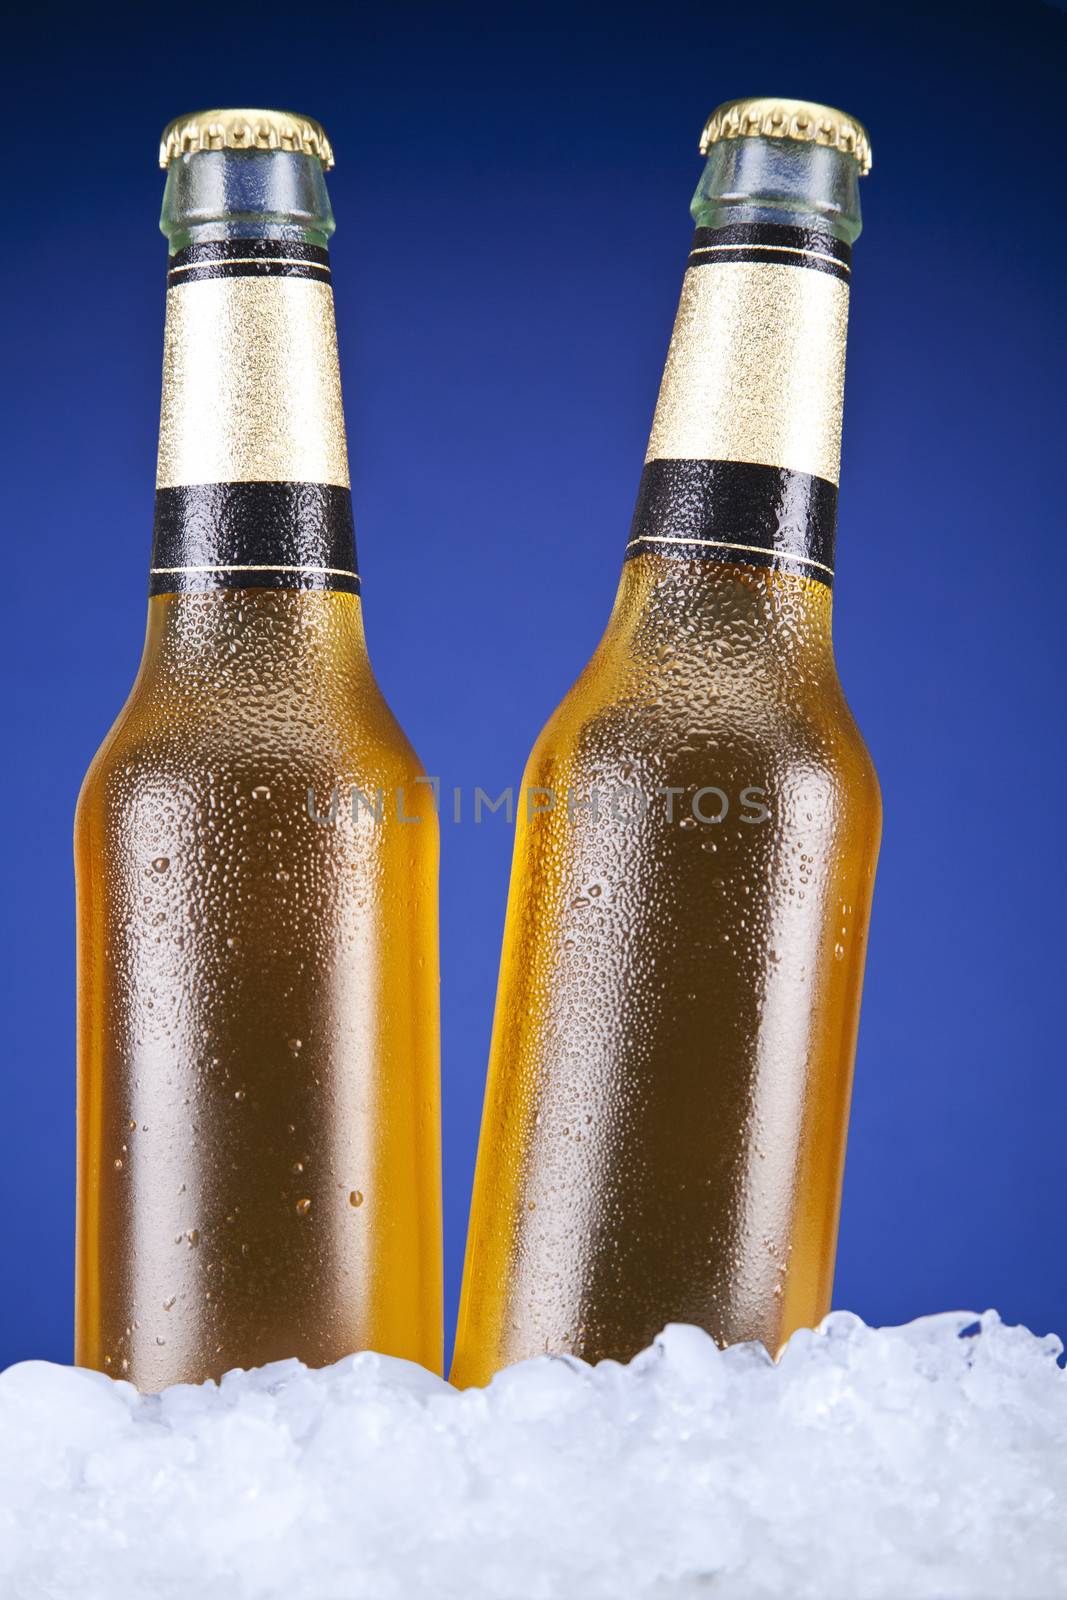 Two beer bottles sitting on ice over a blue background.